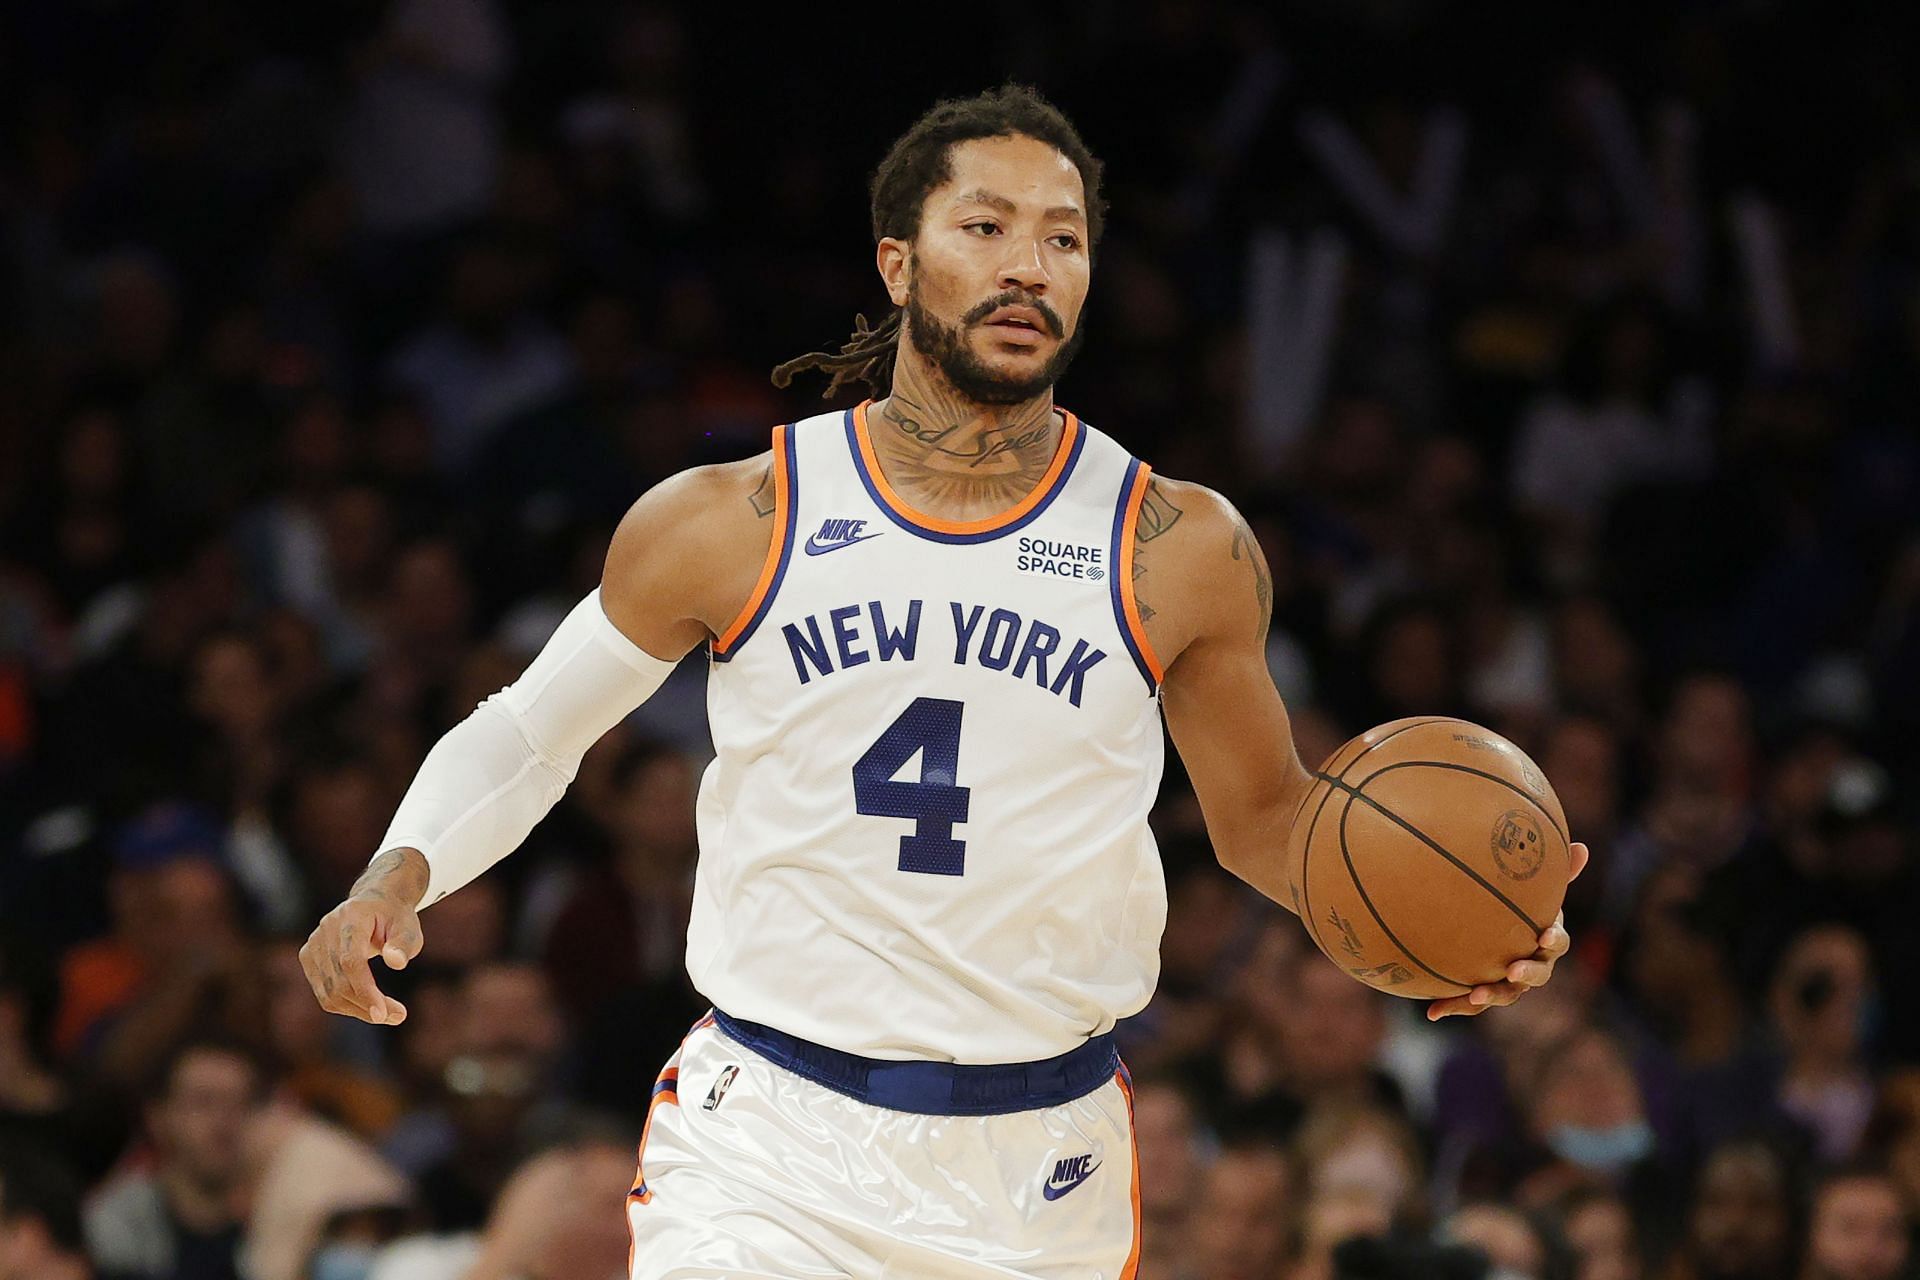 Derrick Rose continues to provide excellent leadership for the New York Knicks